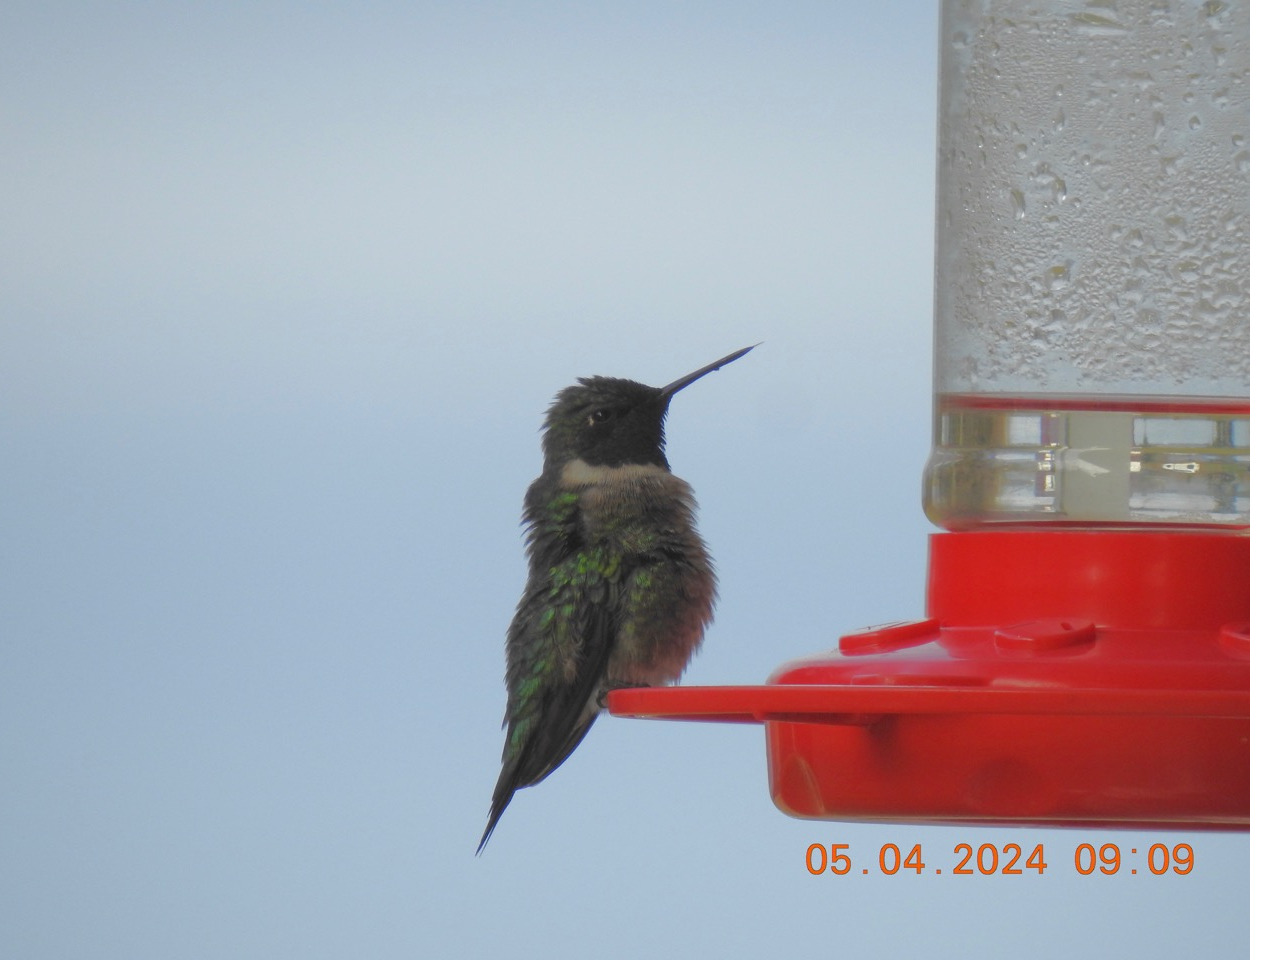 A close-up of a hummingbird on a nearly empty feeder